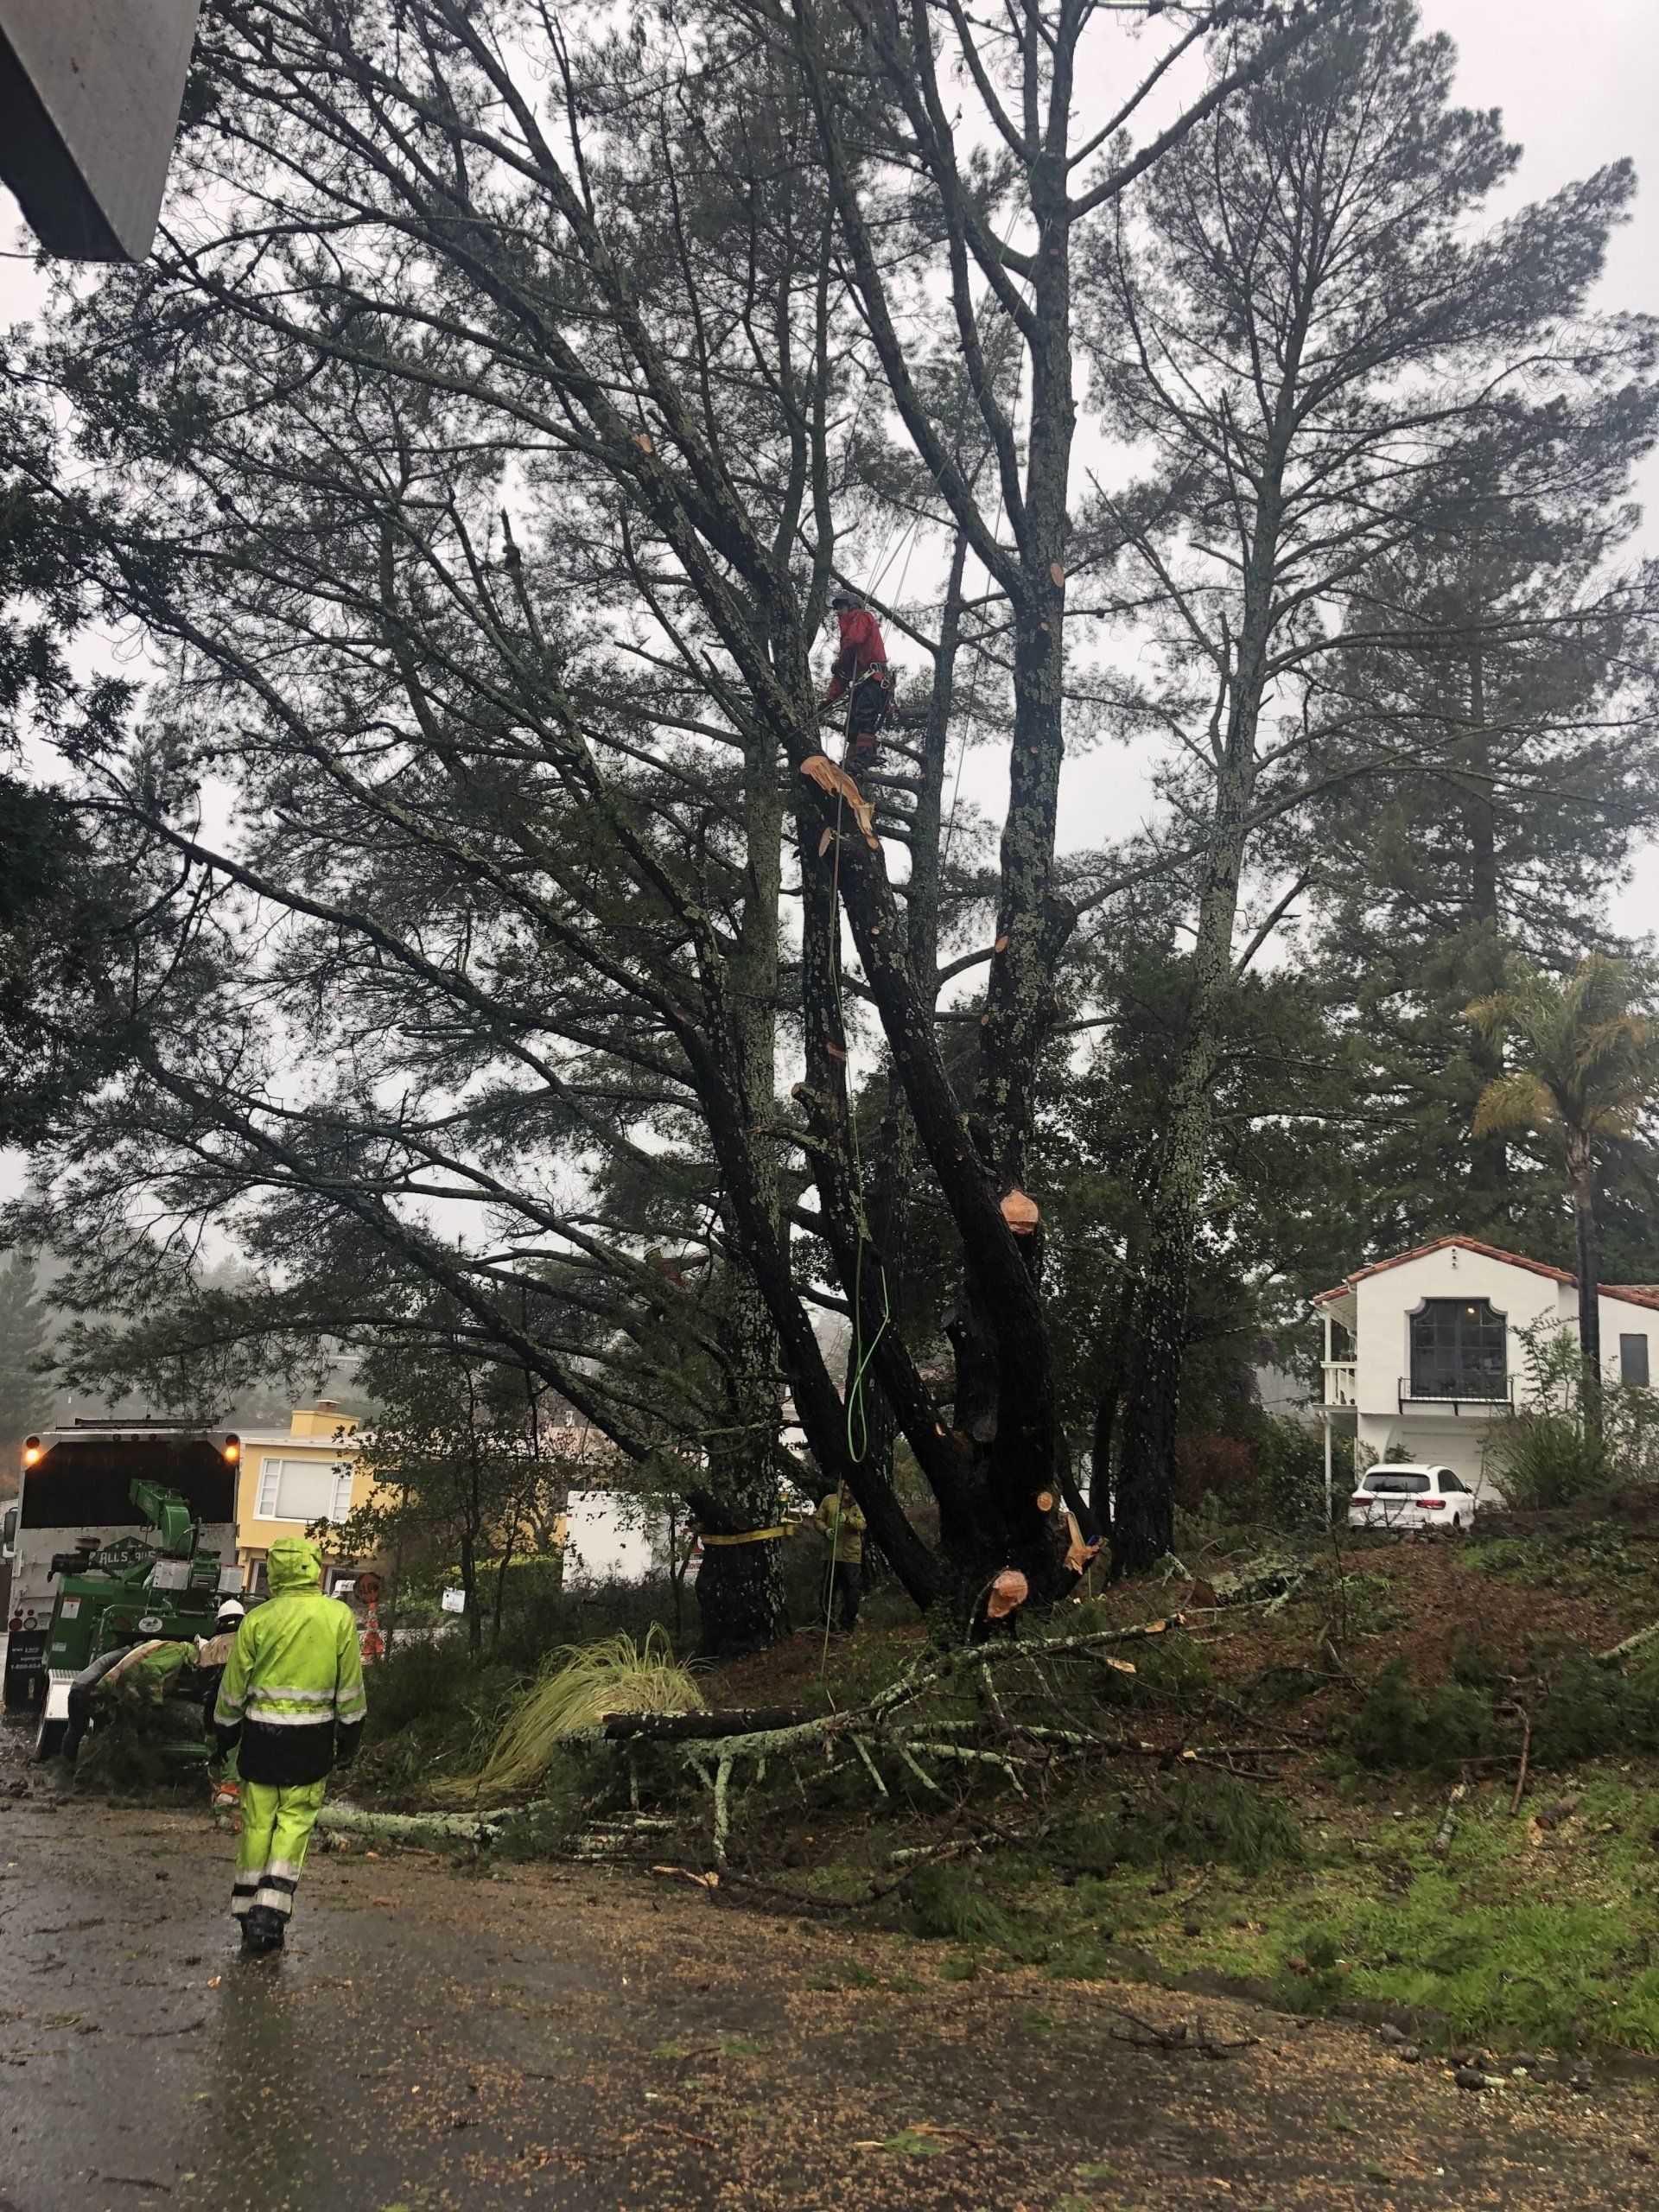 A 24-hour emergency tree cabling being performed in Mill Valley, CA